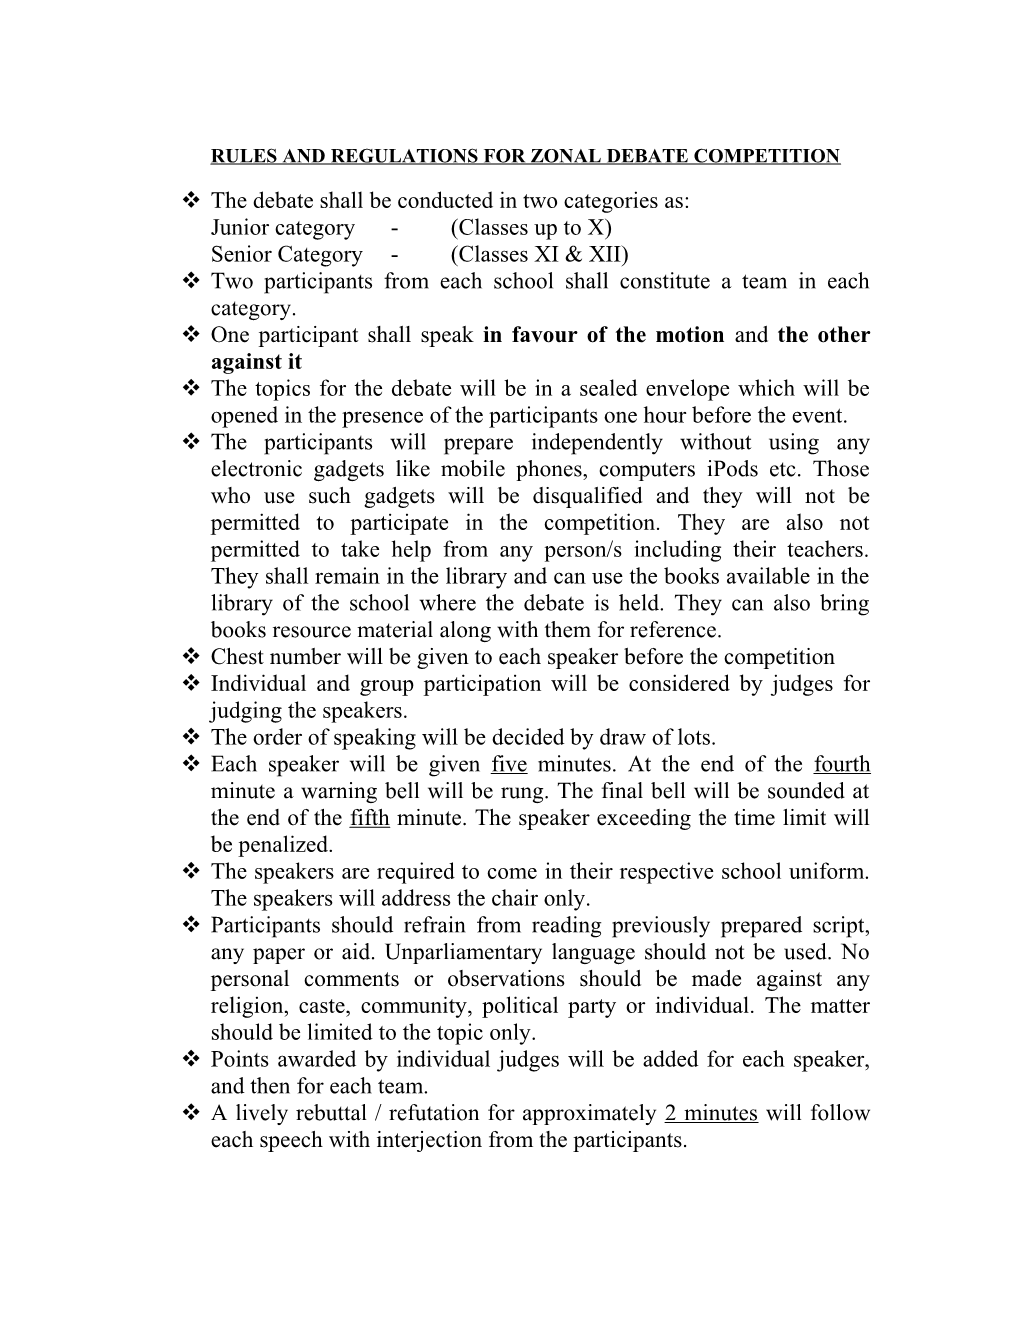 Rules and Regulations for Zonal Debate Competition